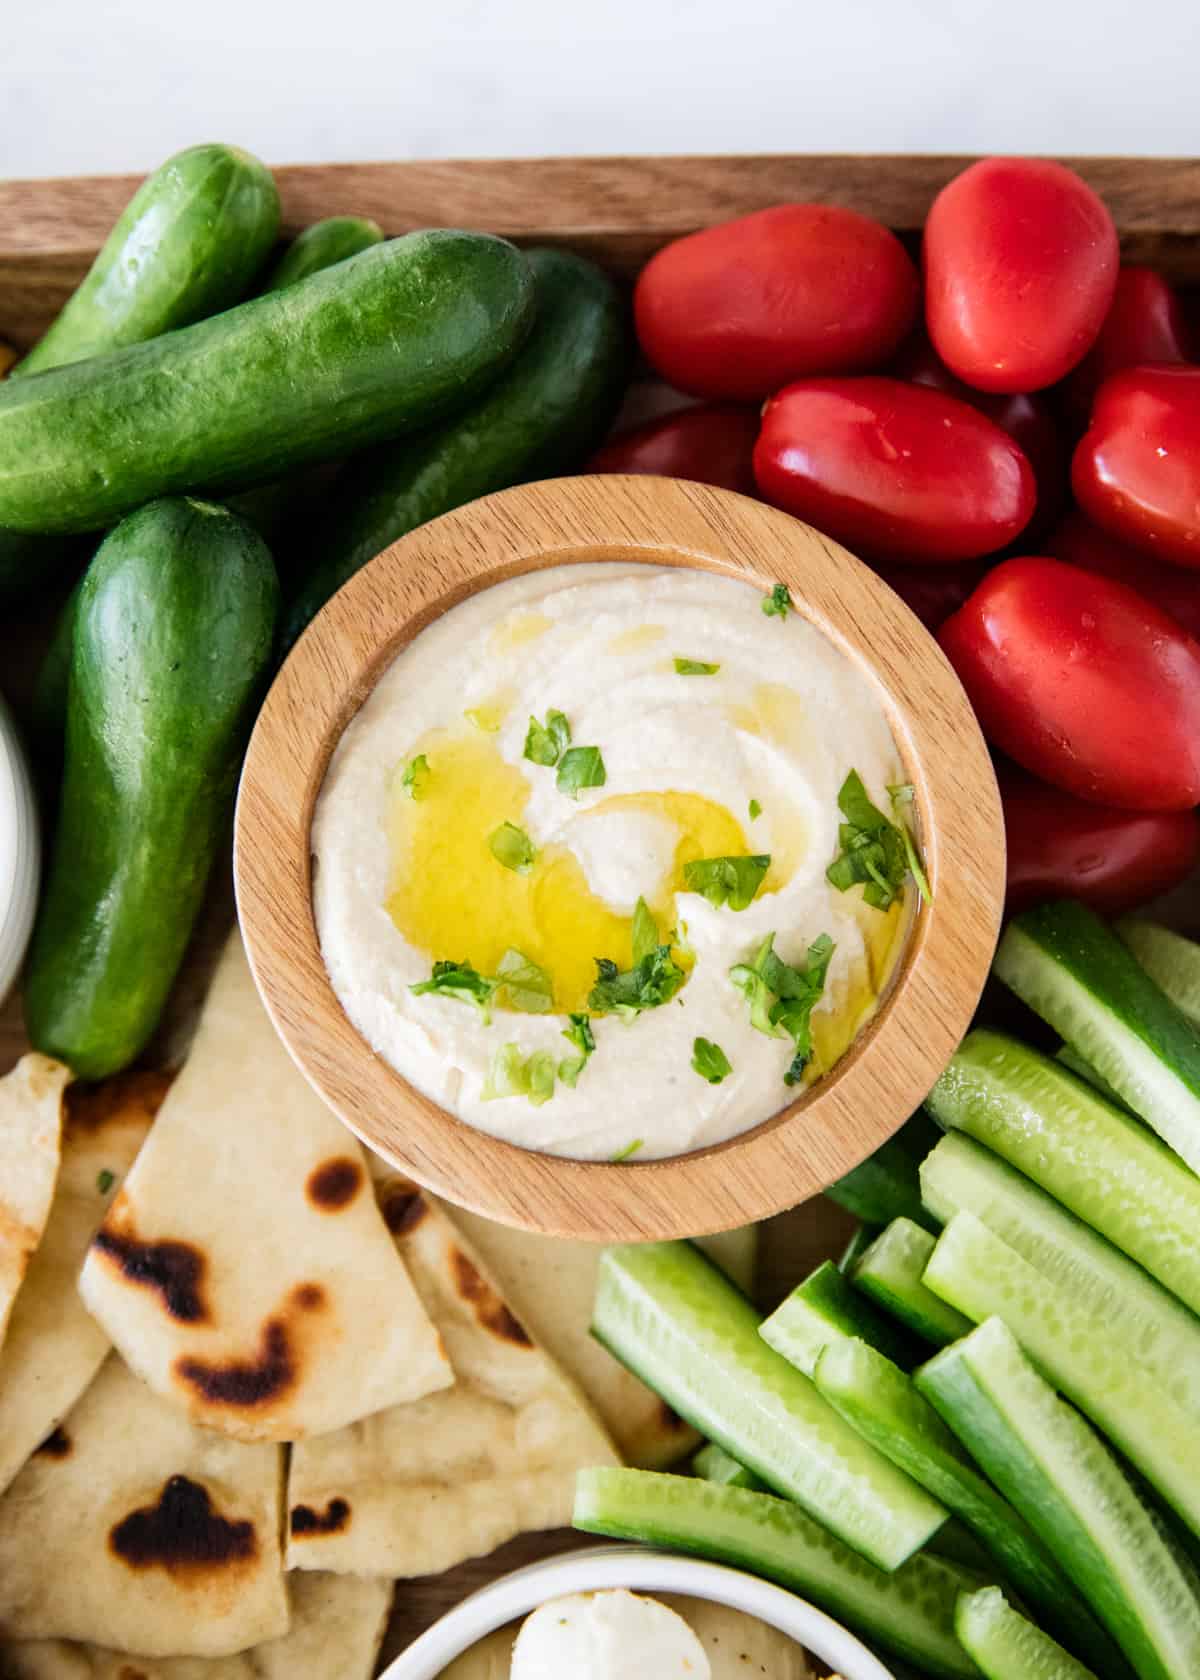 Hummus in wooden bowl with vegetables.